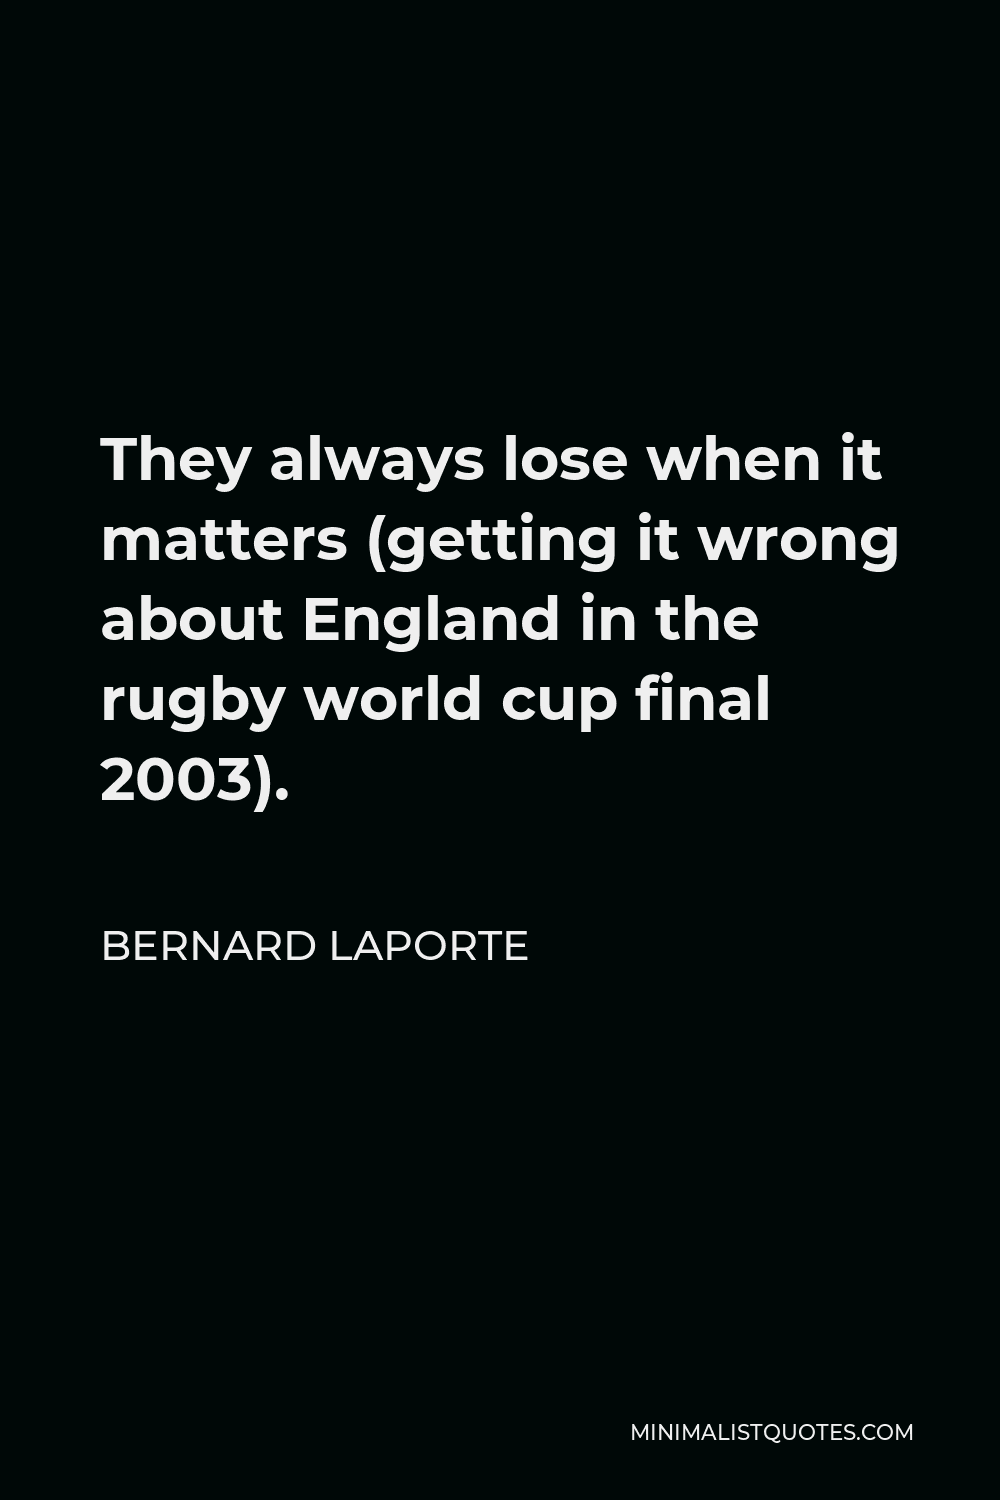 Bernard Laporte Quote - They always lose when it matters (getting it wrong about England in the rugby world cup final 2003).